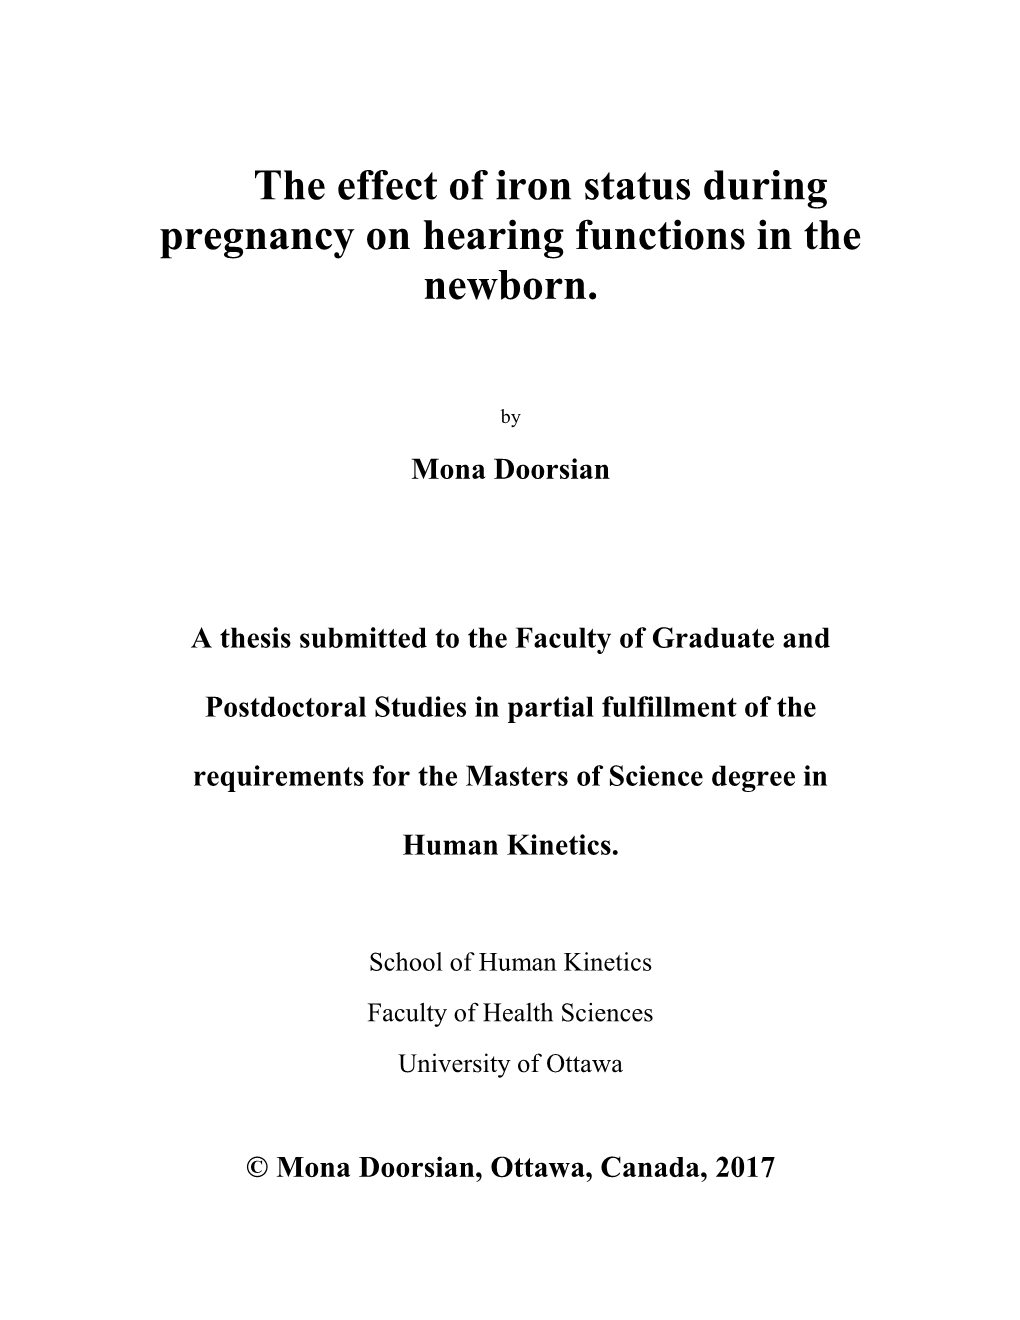 The Effect of Iron Status During Pregnancy on Hearing Functions in the Newborn